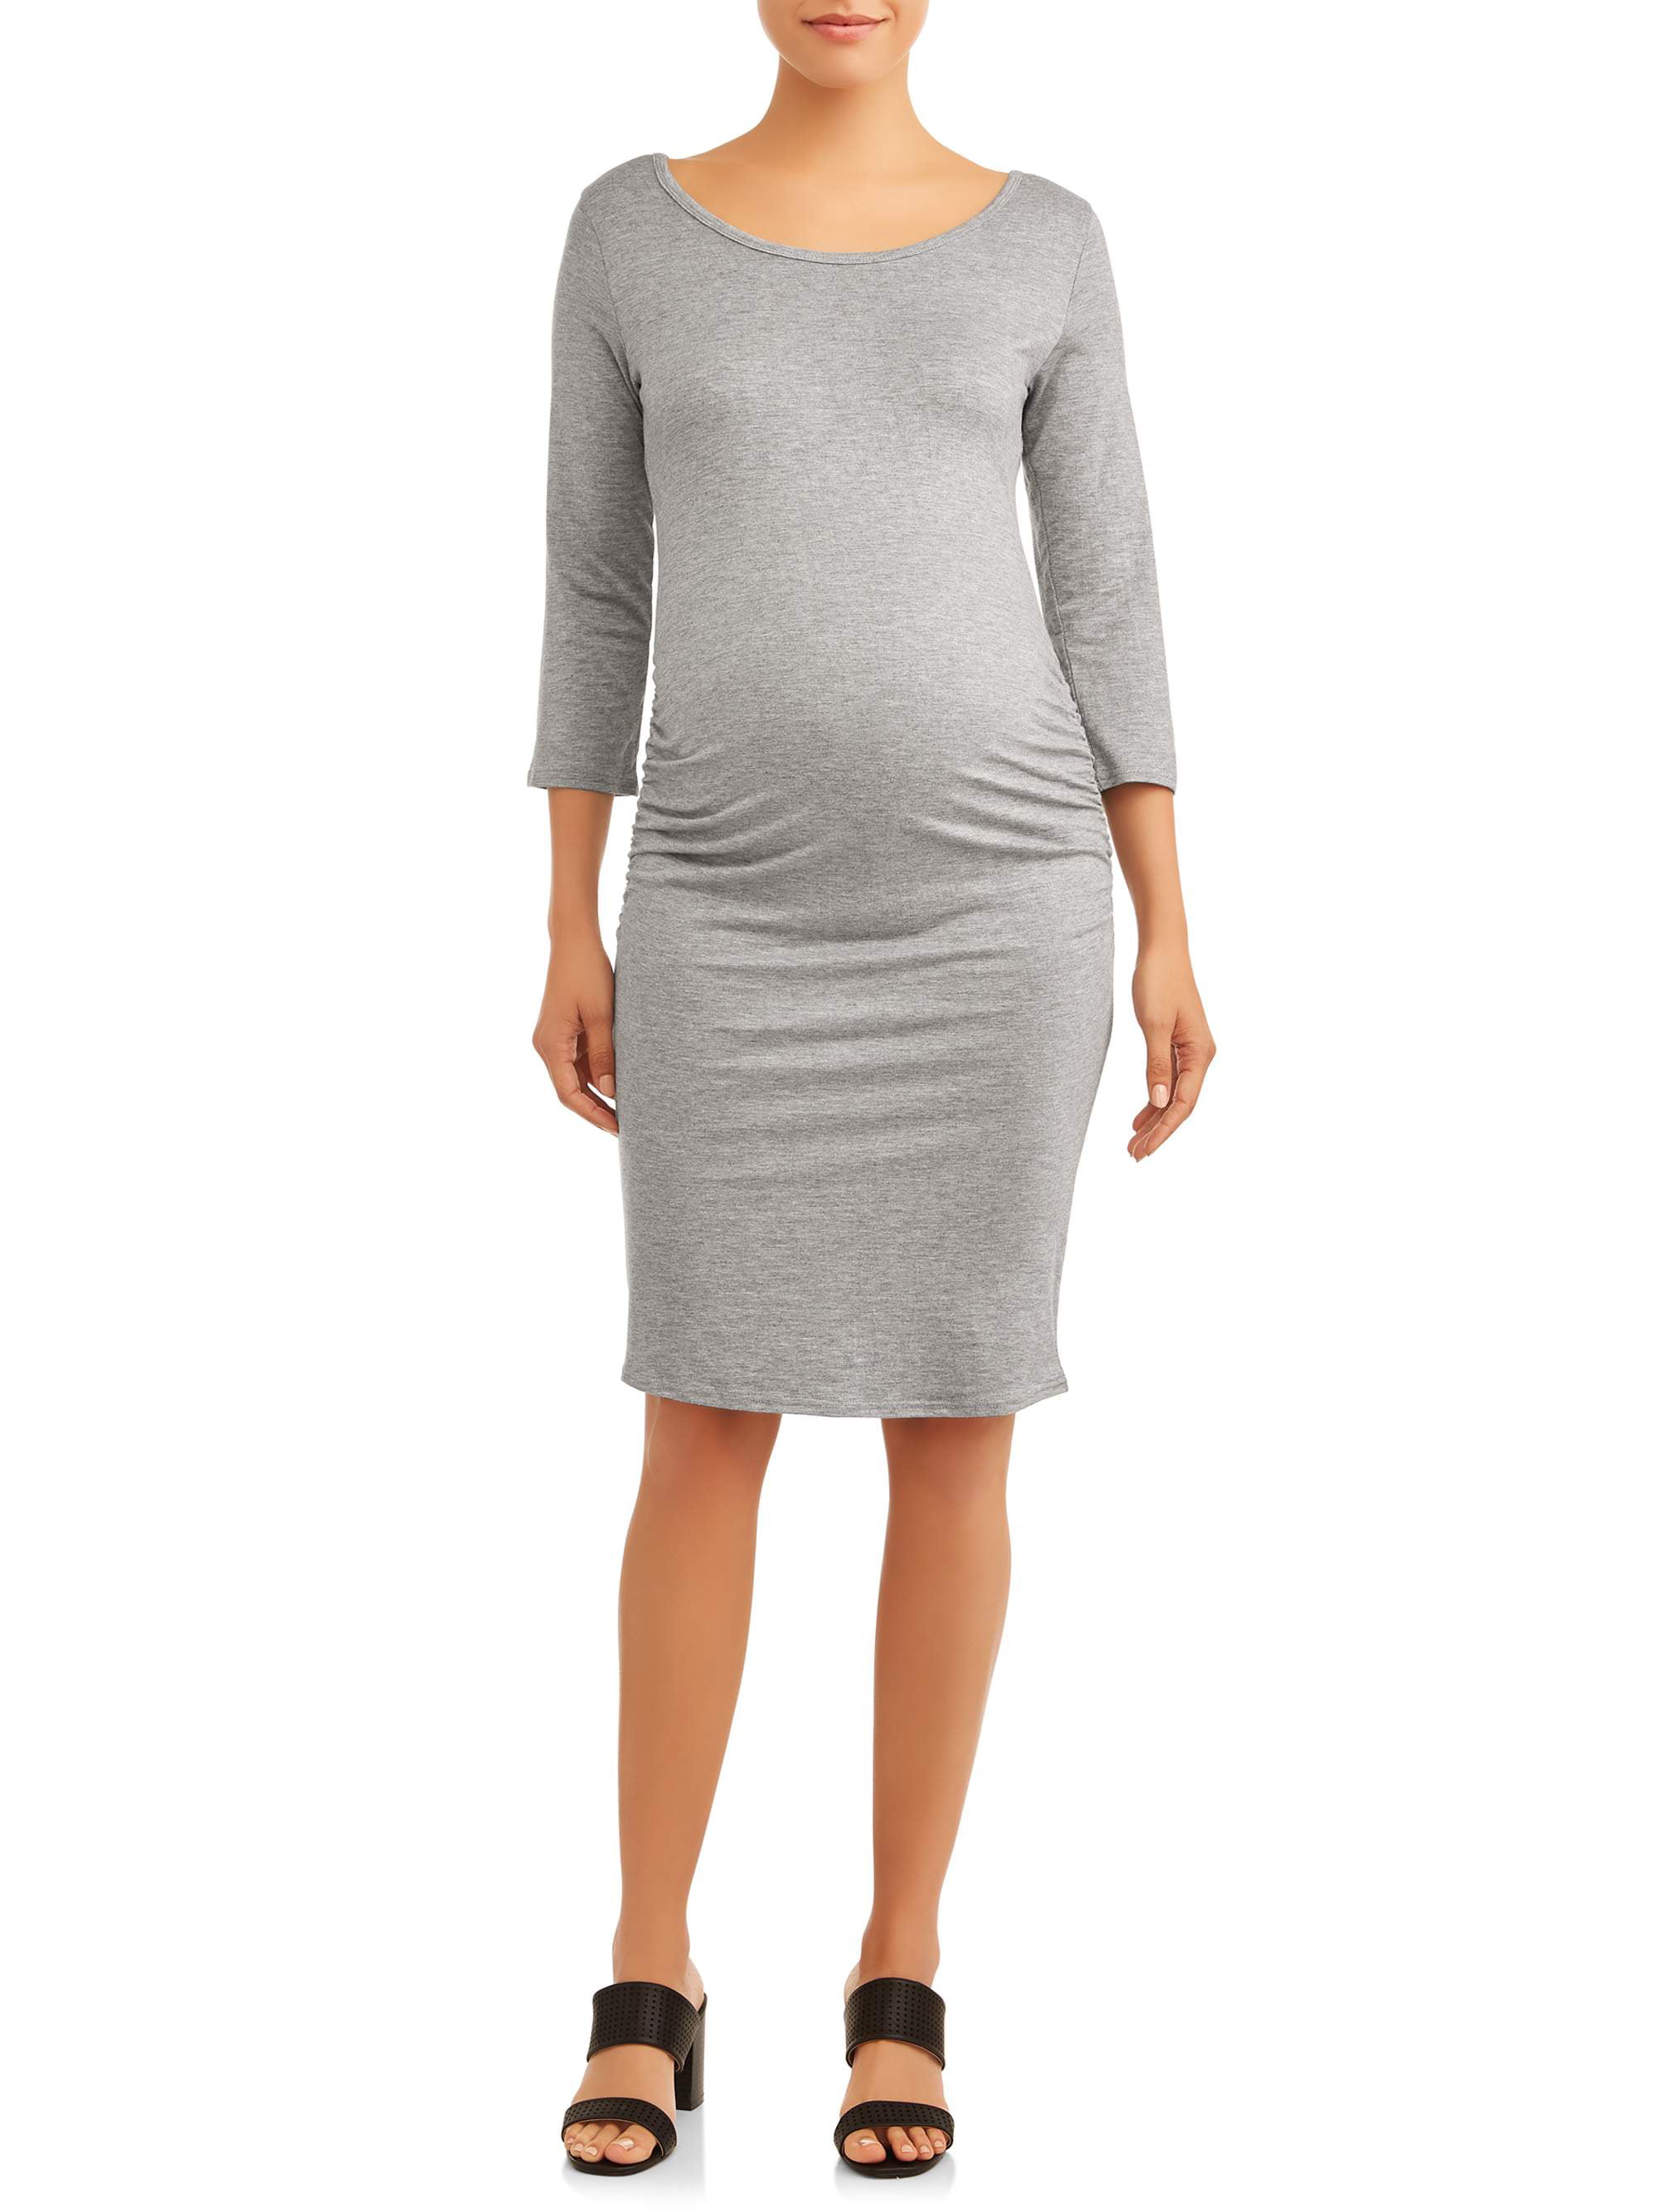 Maternity Oh! Mamma Bodycon Night Out Dress with 3/4 Sleeves - Walmart.com